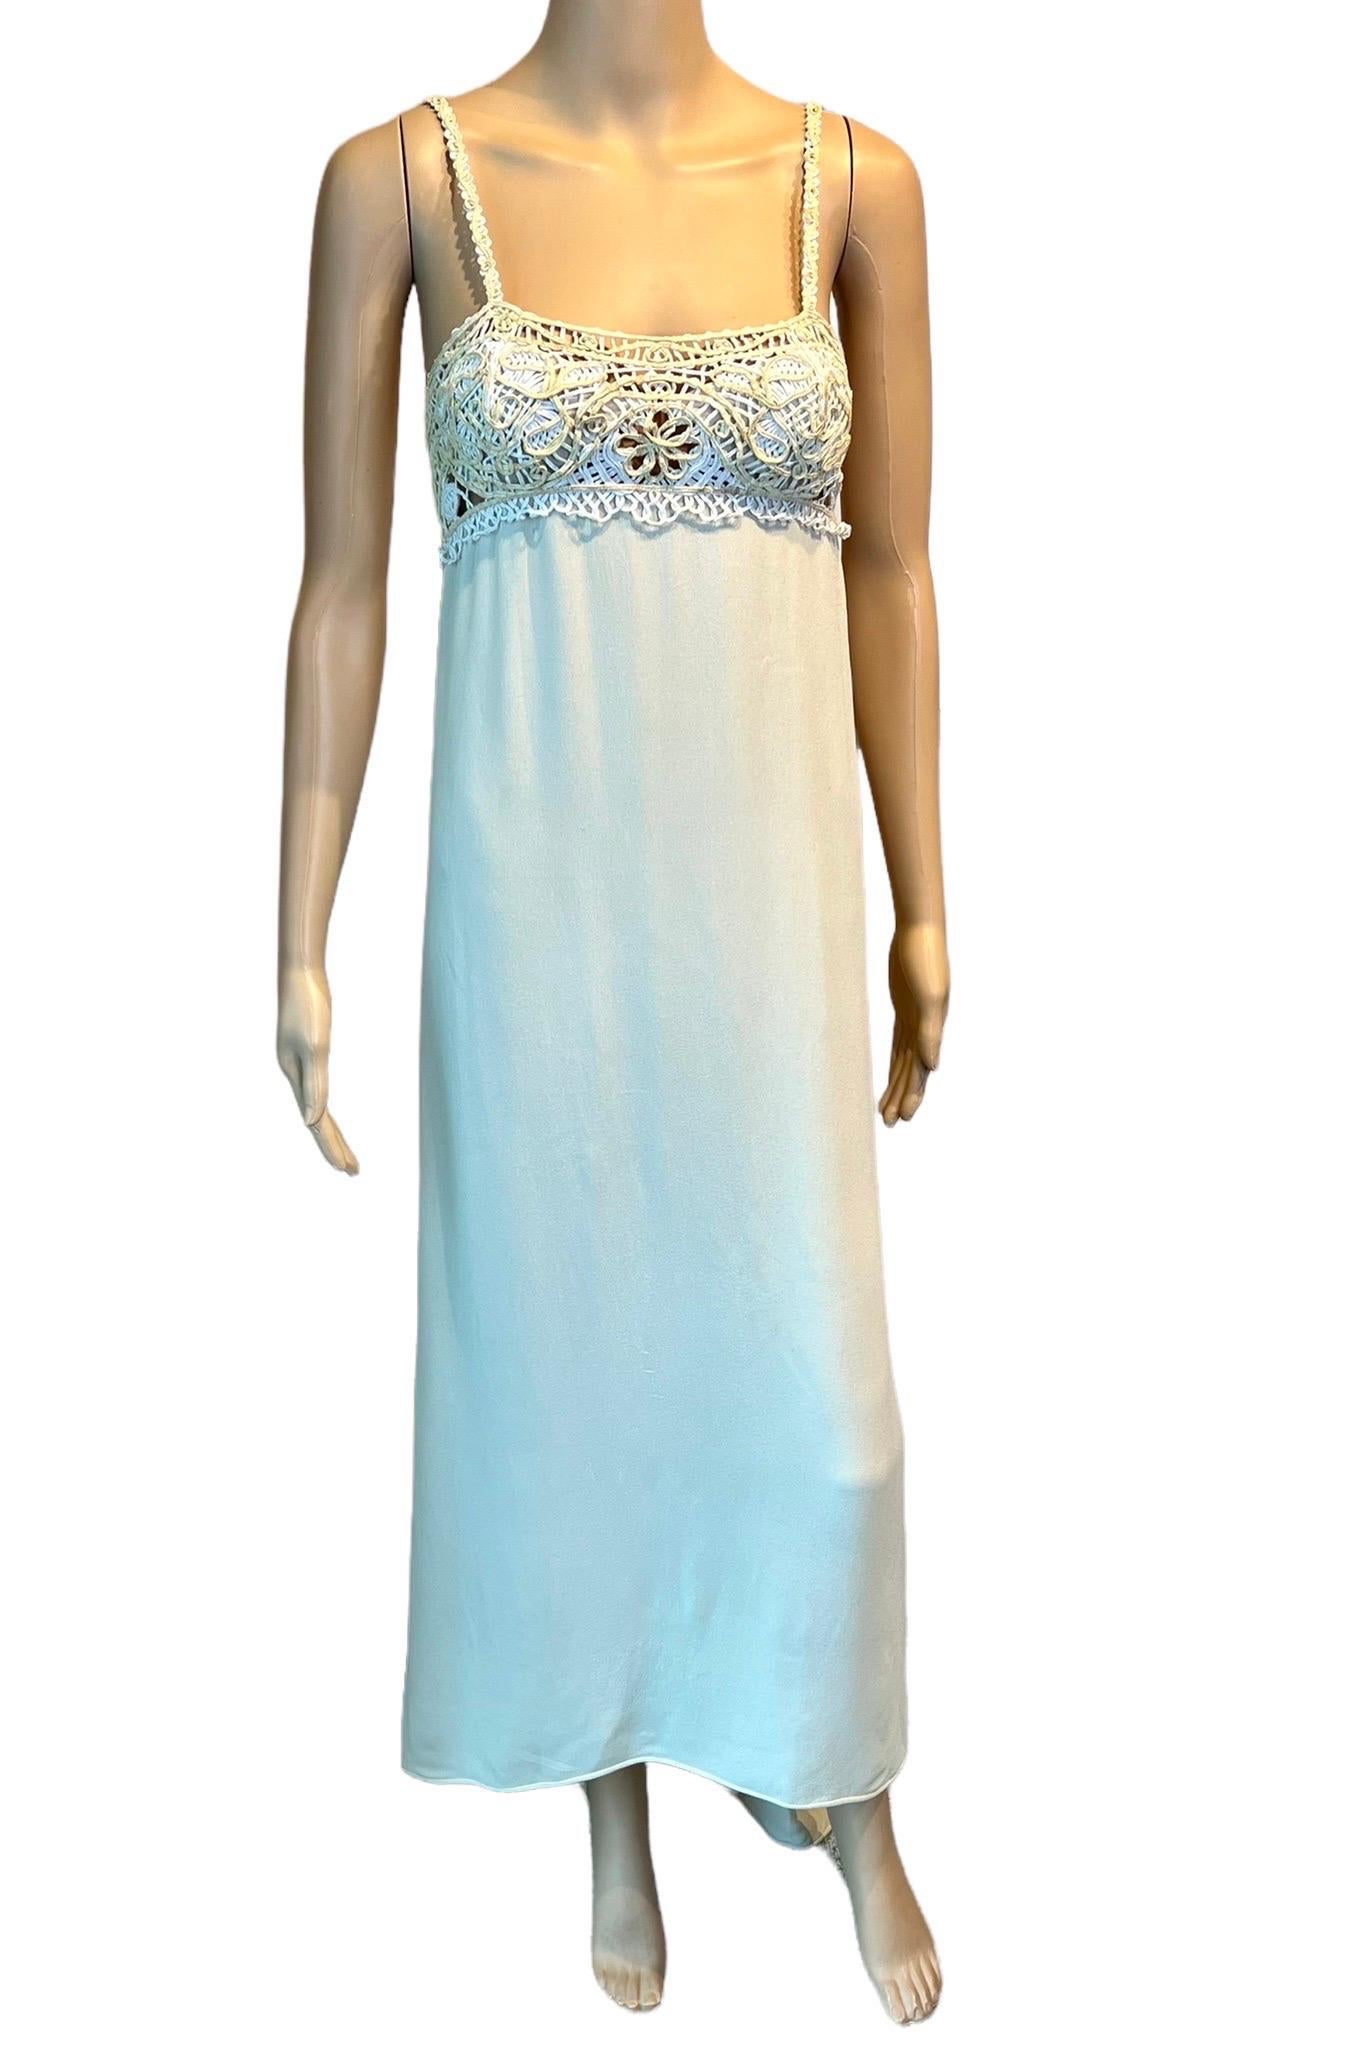 Gianni Versace S/S 1997 Runway Embroidered Lace Ivory Evening Dress Gown  For Sale 4